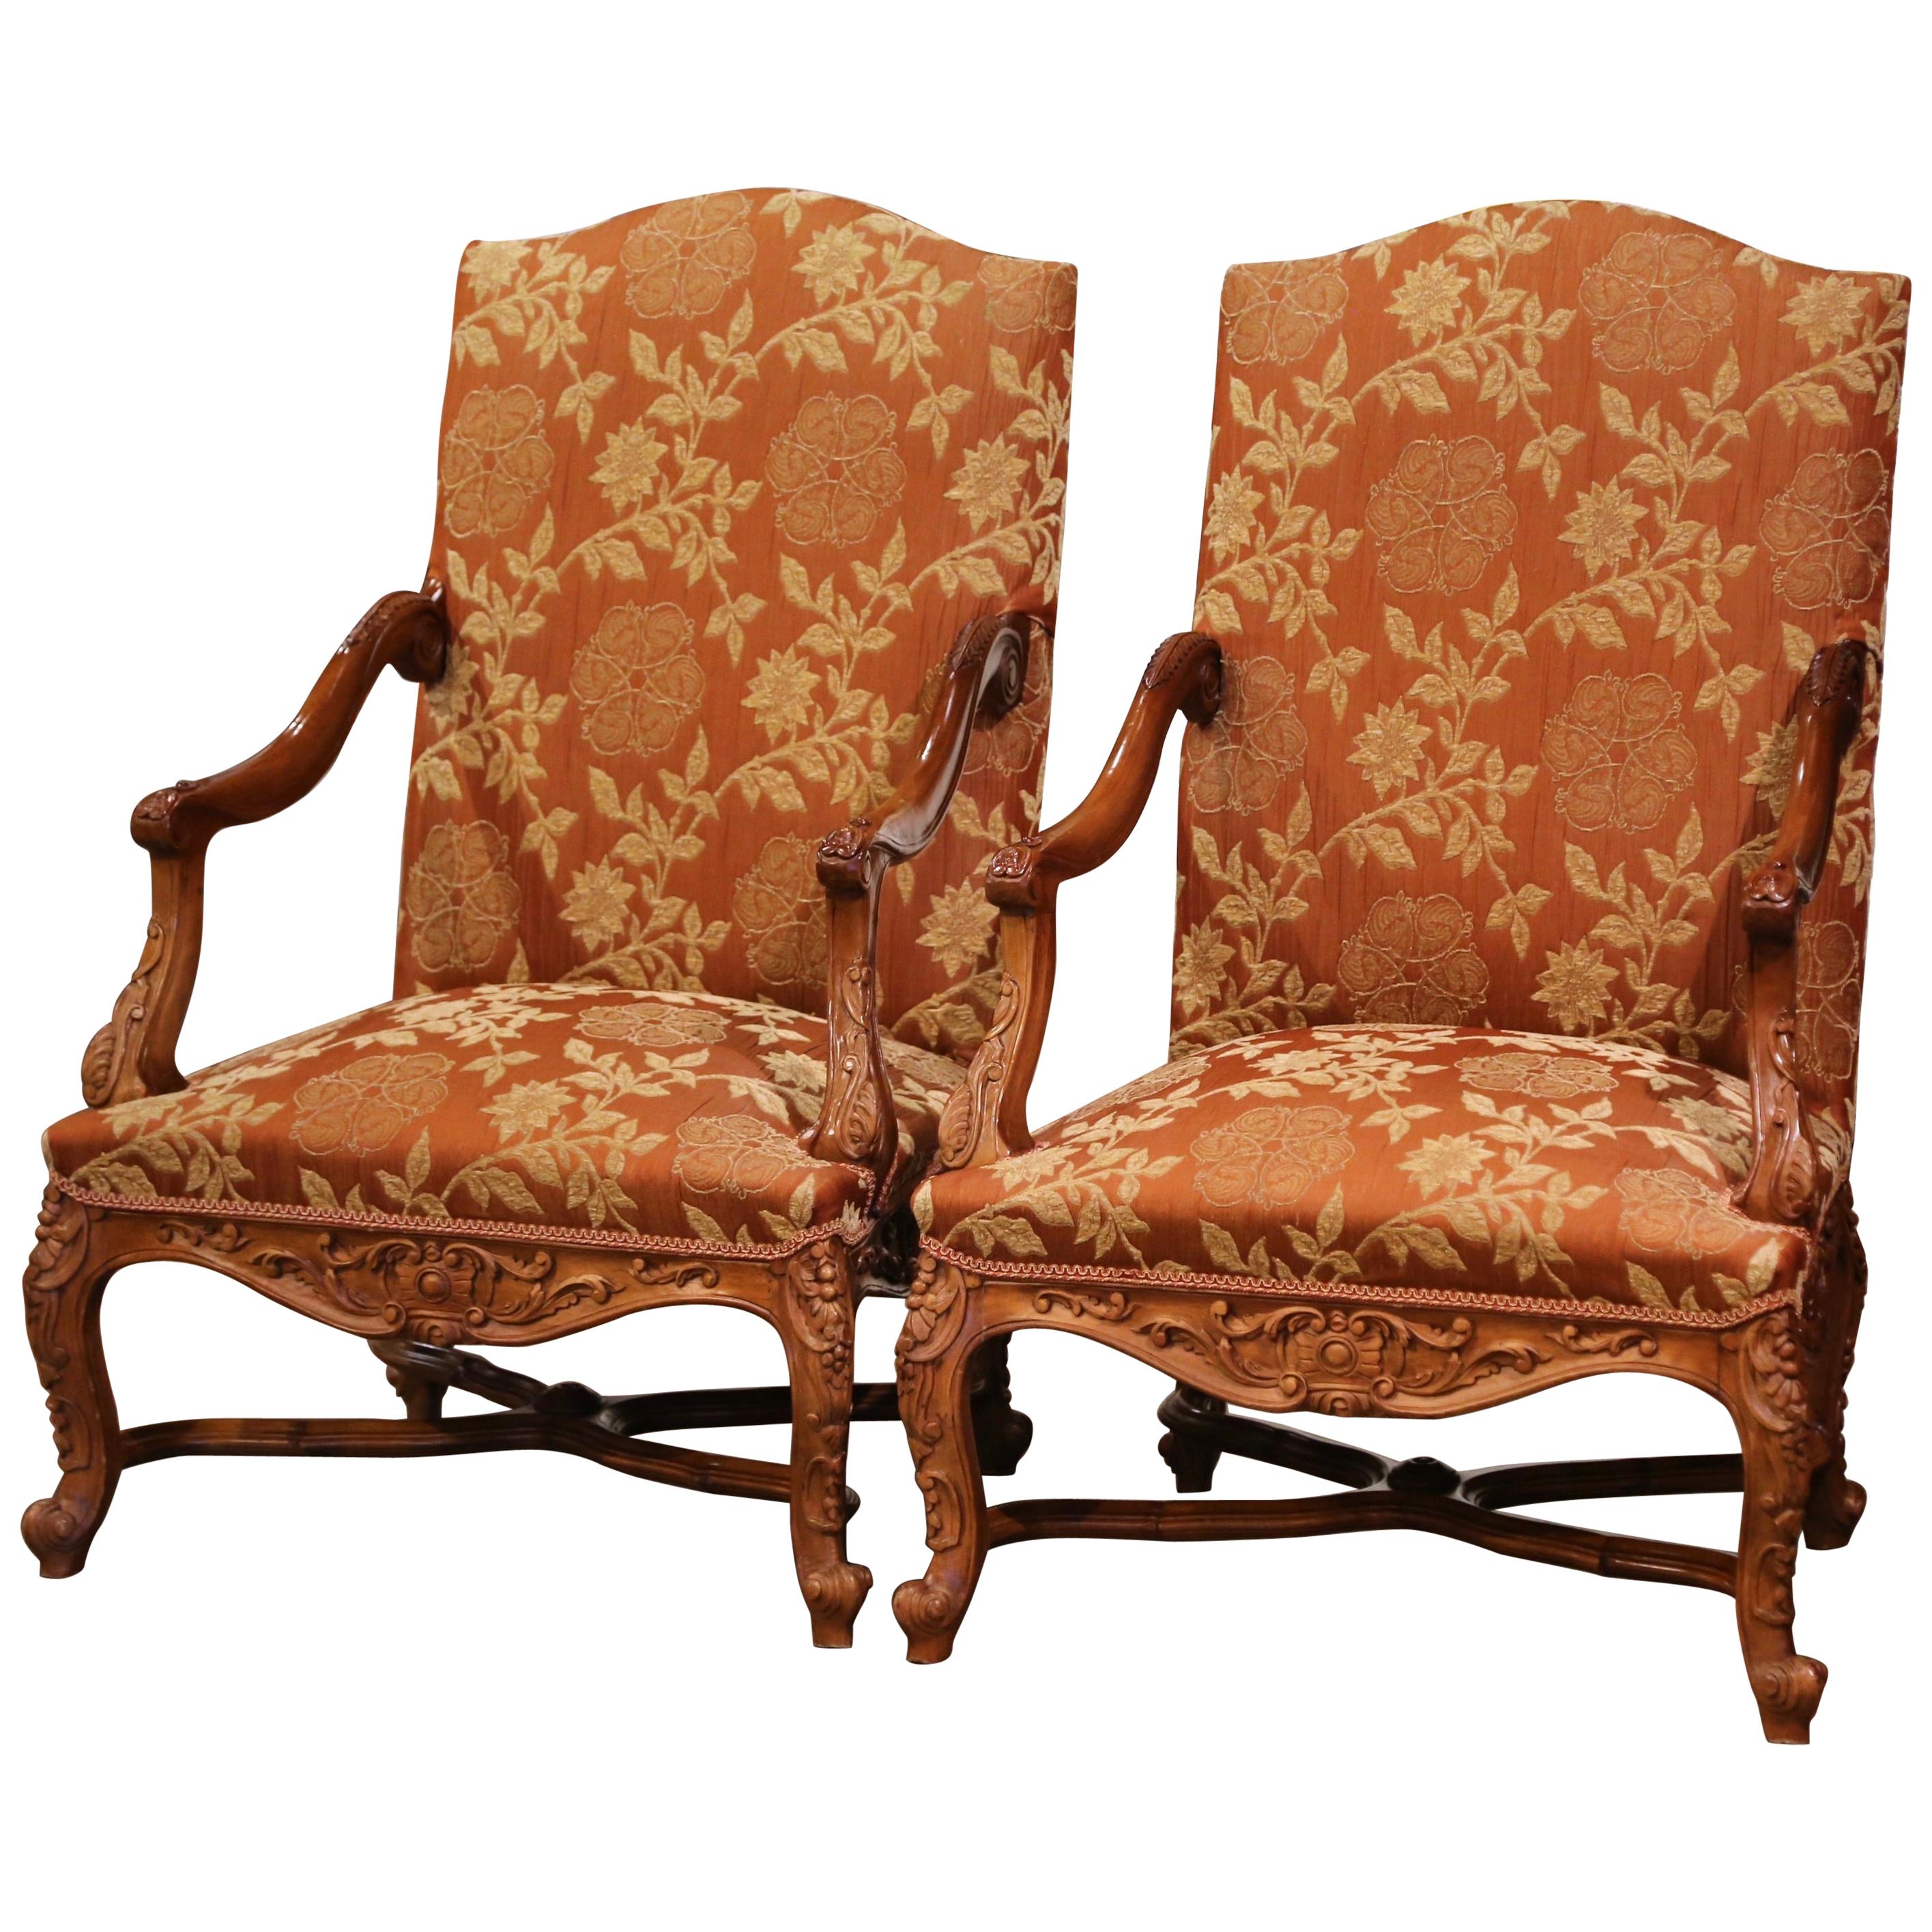 Pair of 19th Century Louis XV Carved Walnut Armchairs from Provence